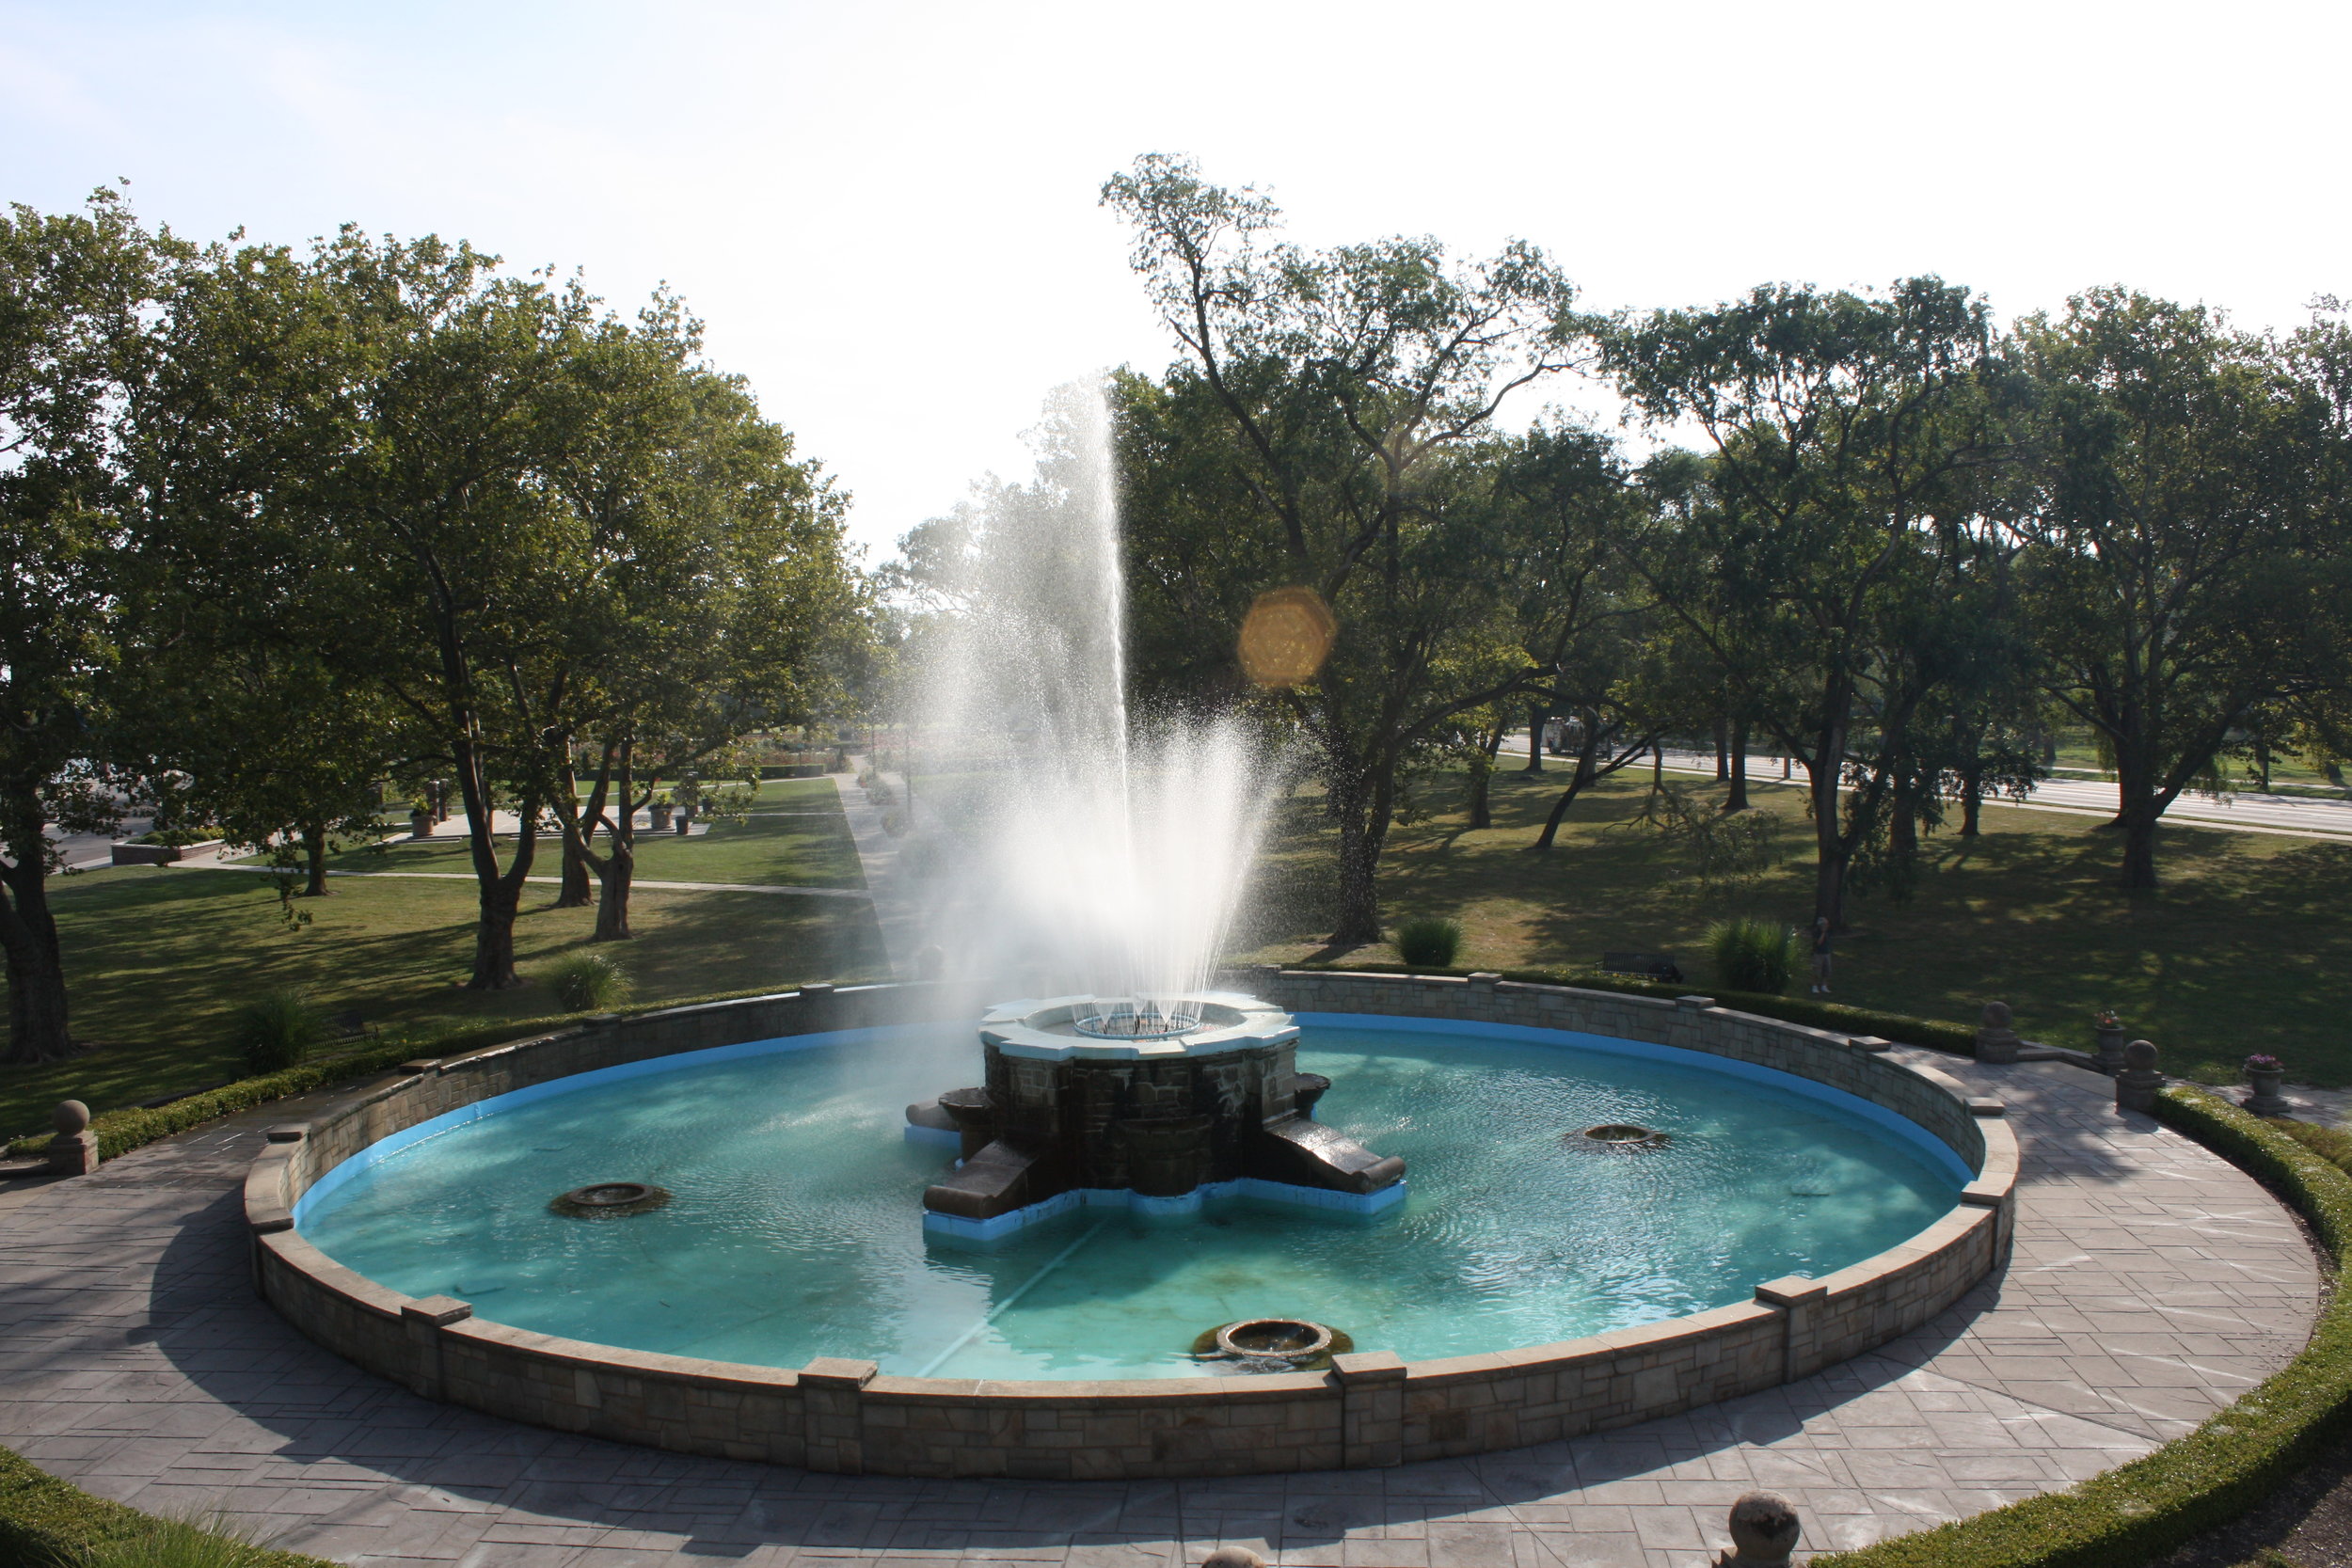 Lakeview Park fountain